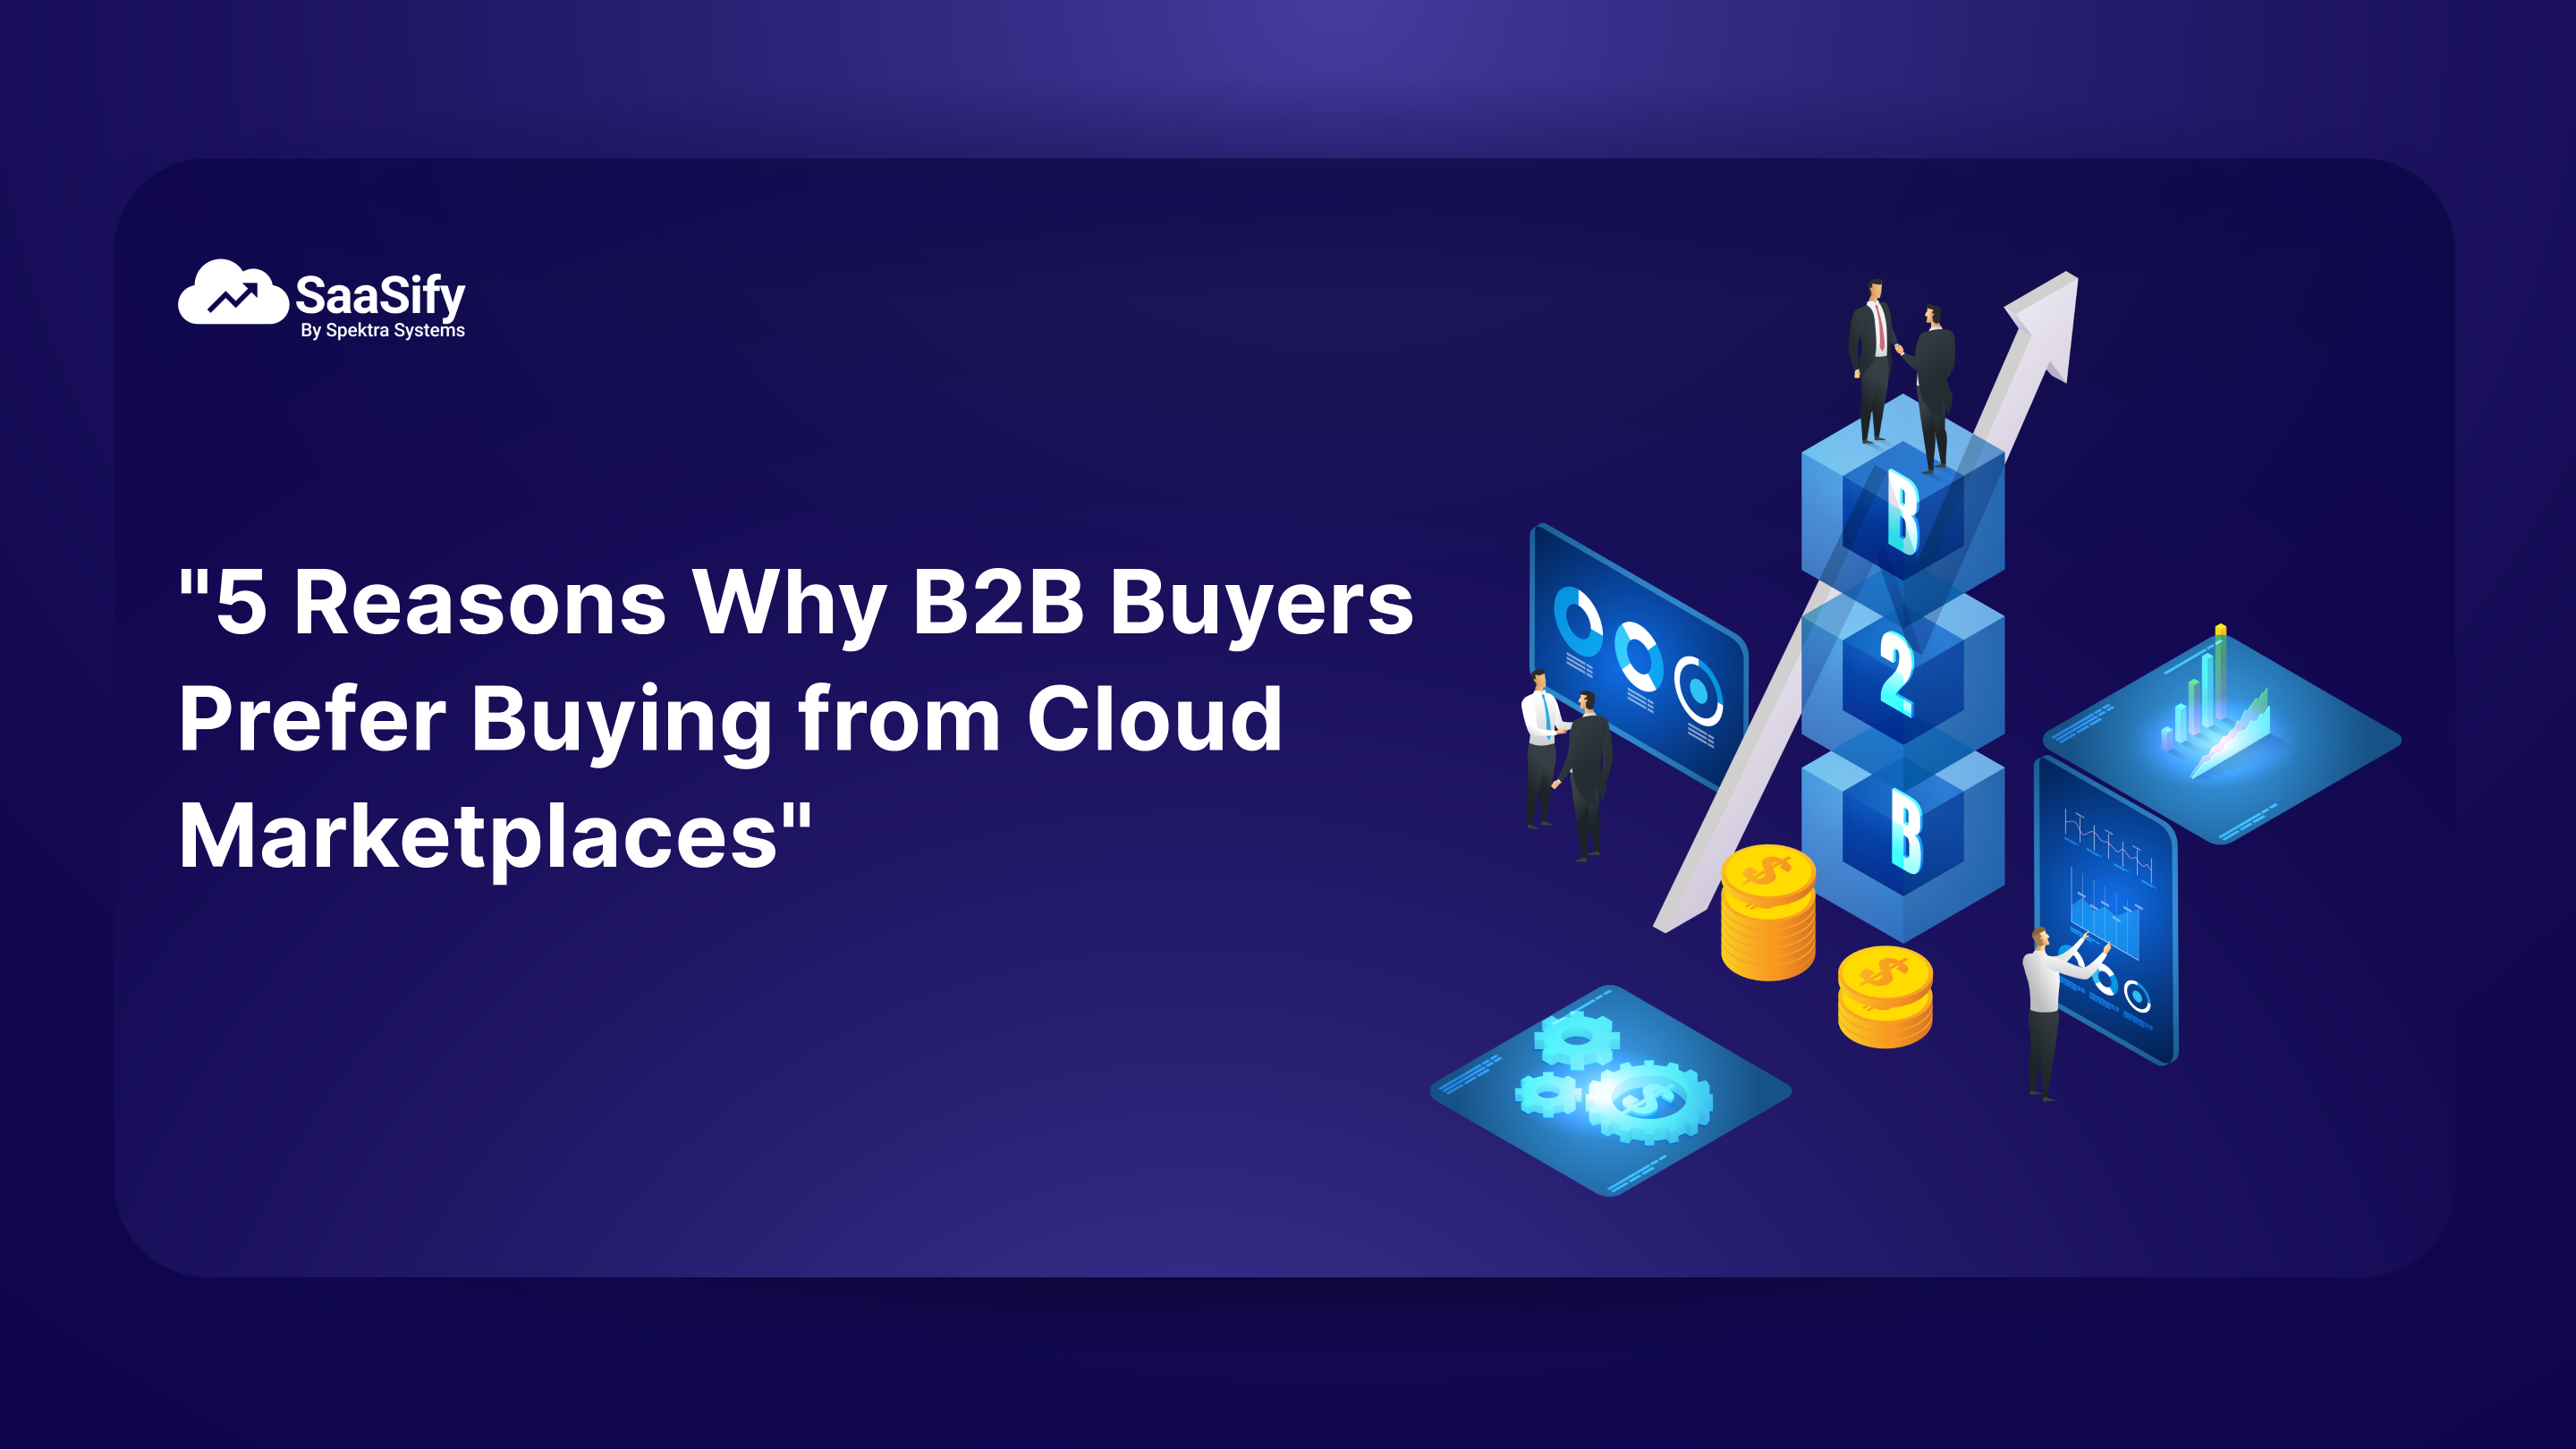 SaaS B2B Buyers are in Cloud Marketplaces: 5 Conclusive Reasons